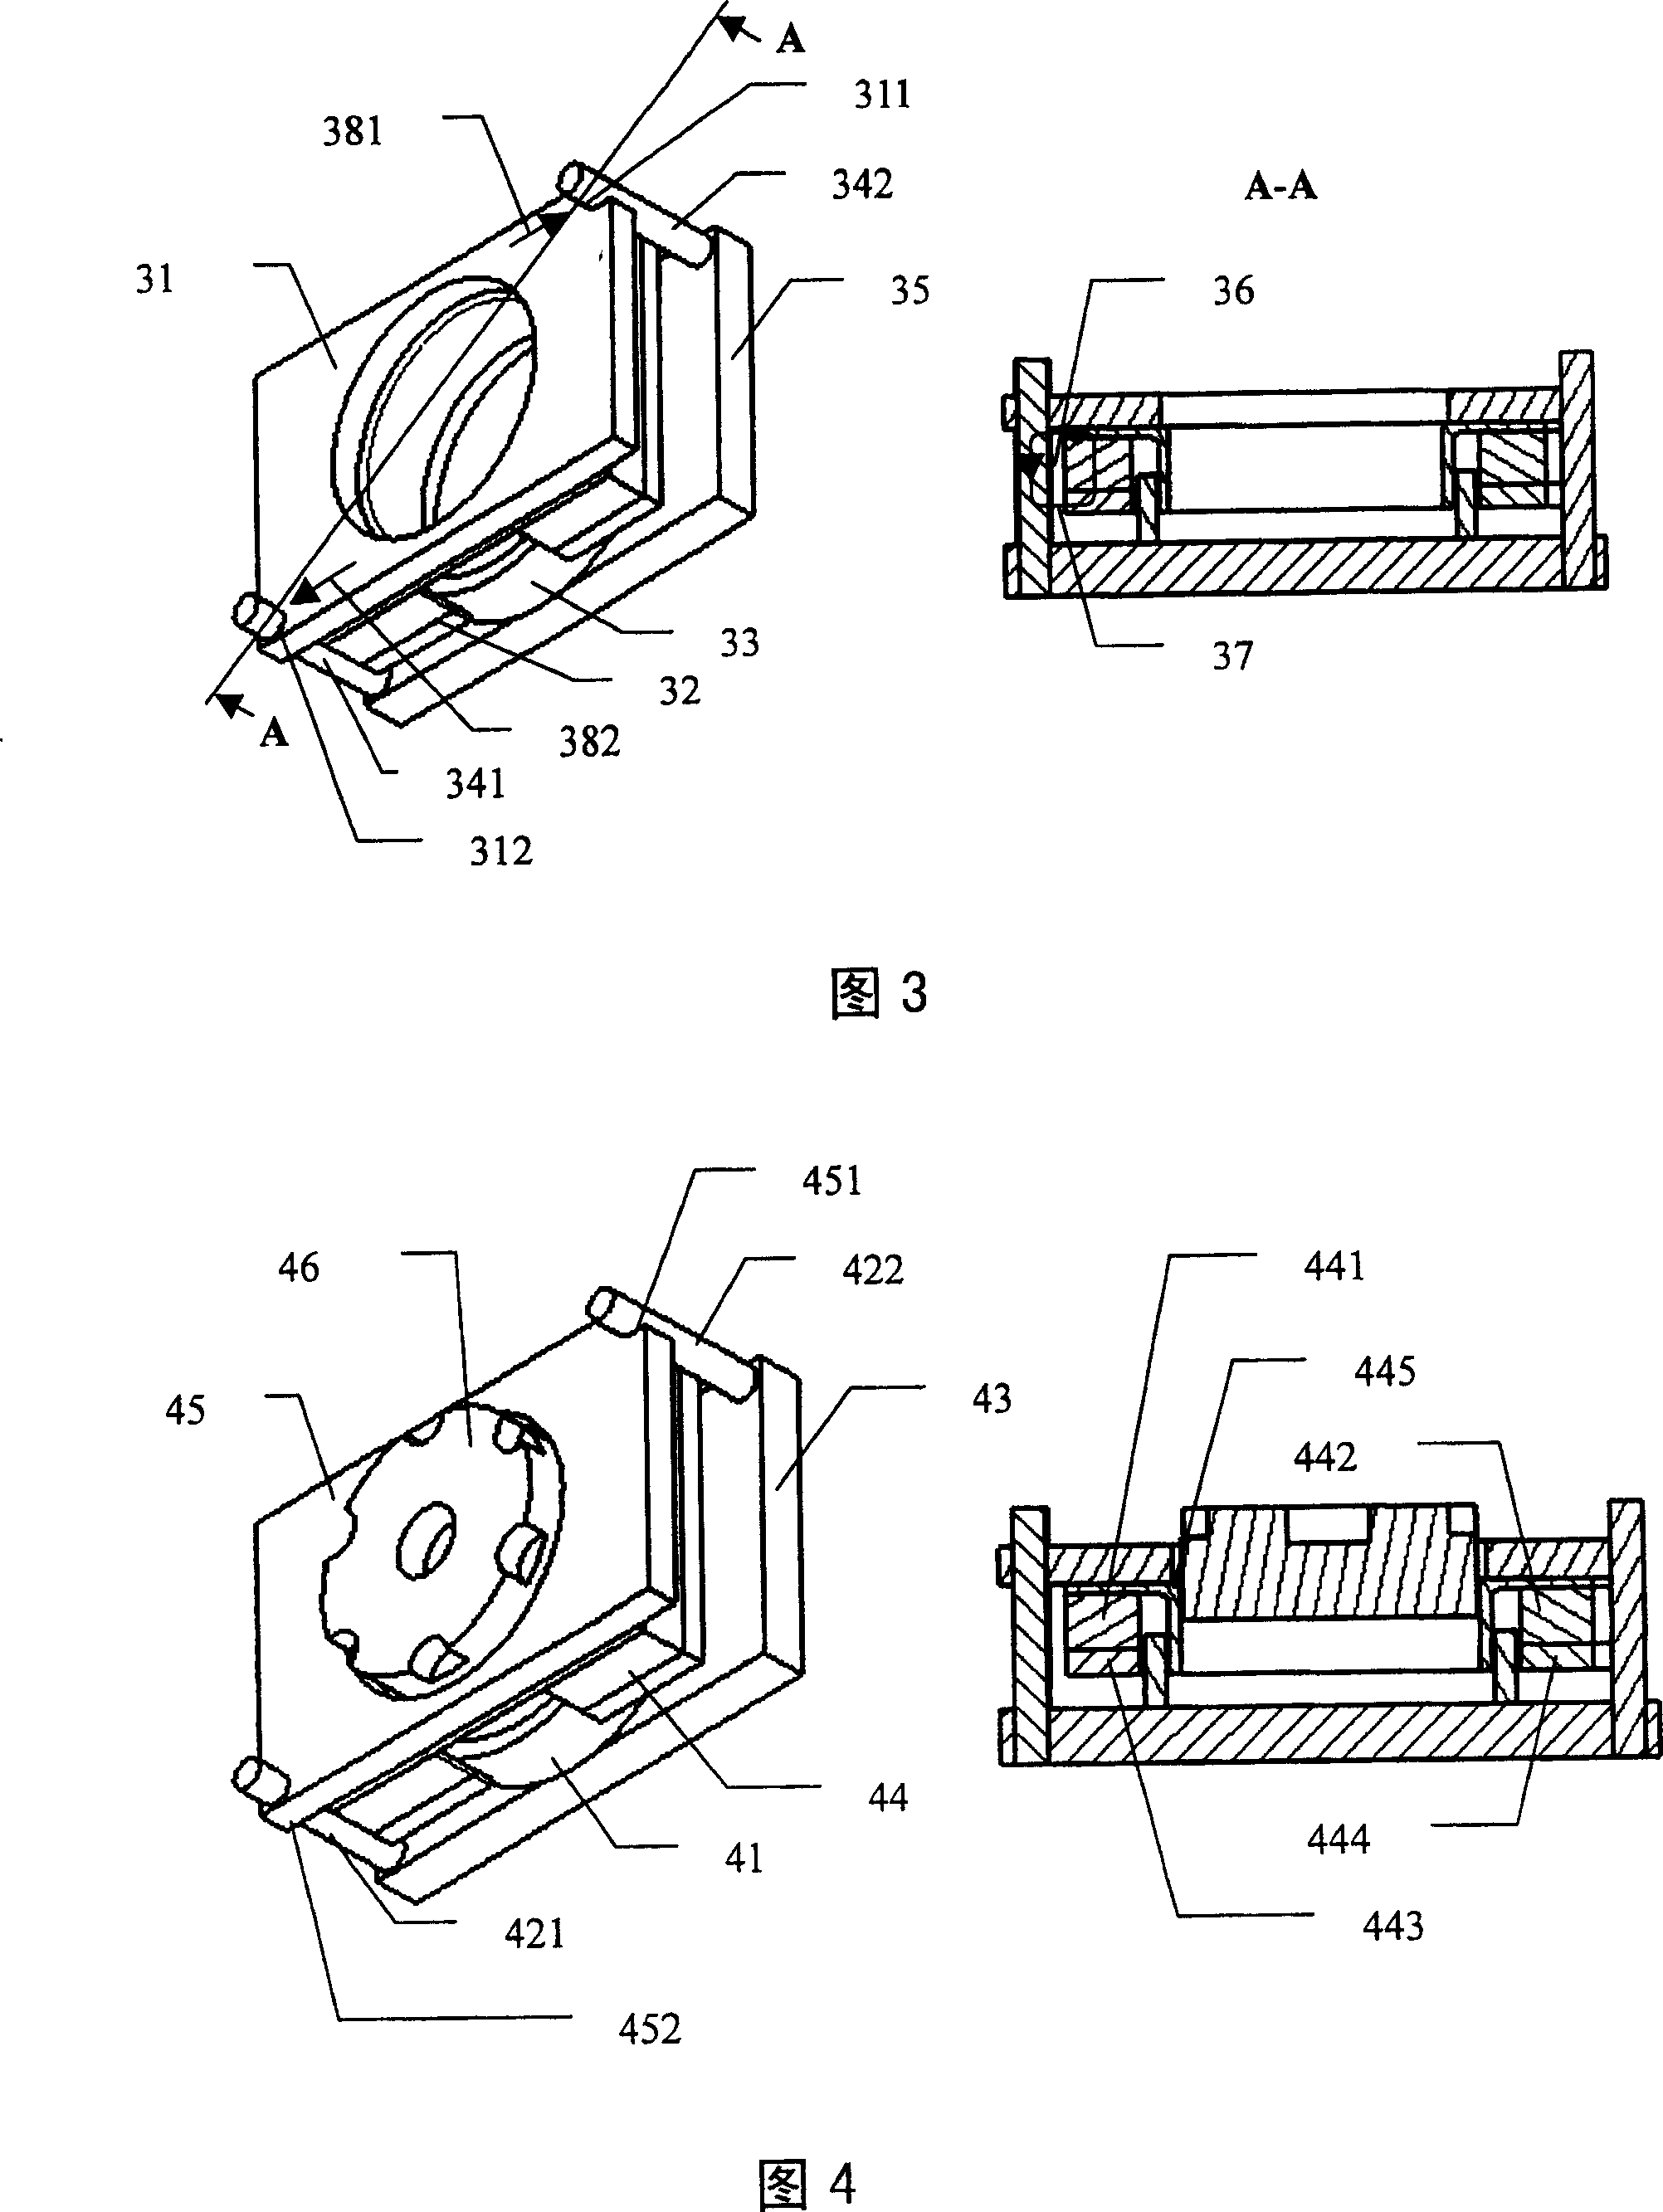 Voice coil motor device